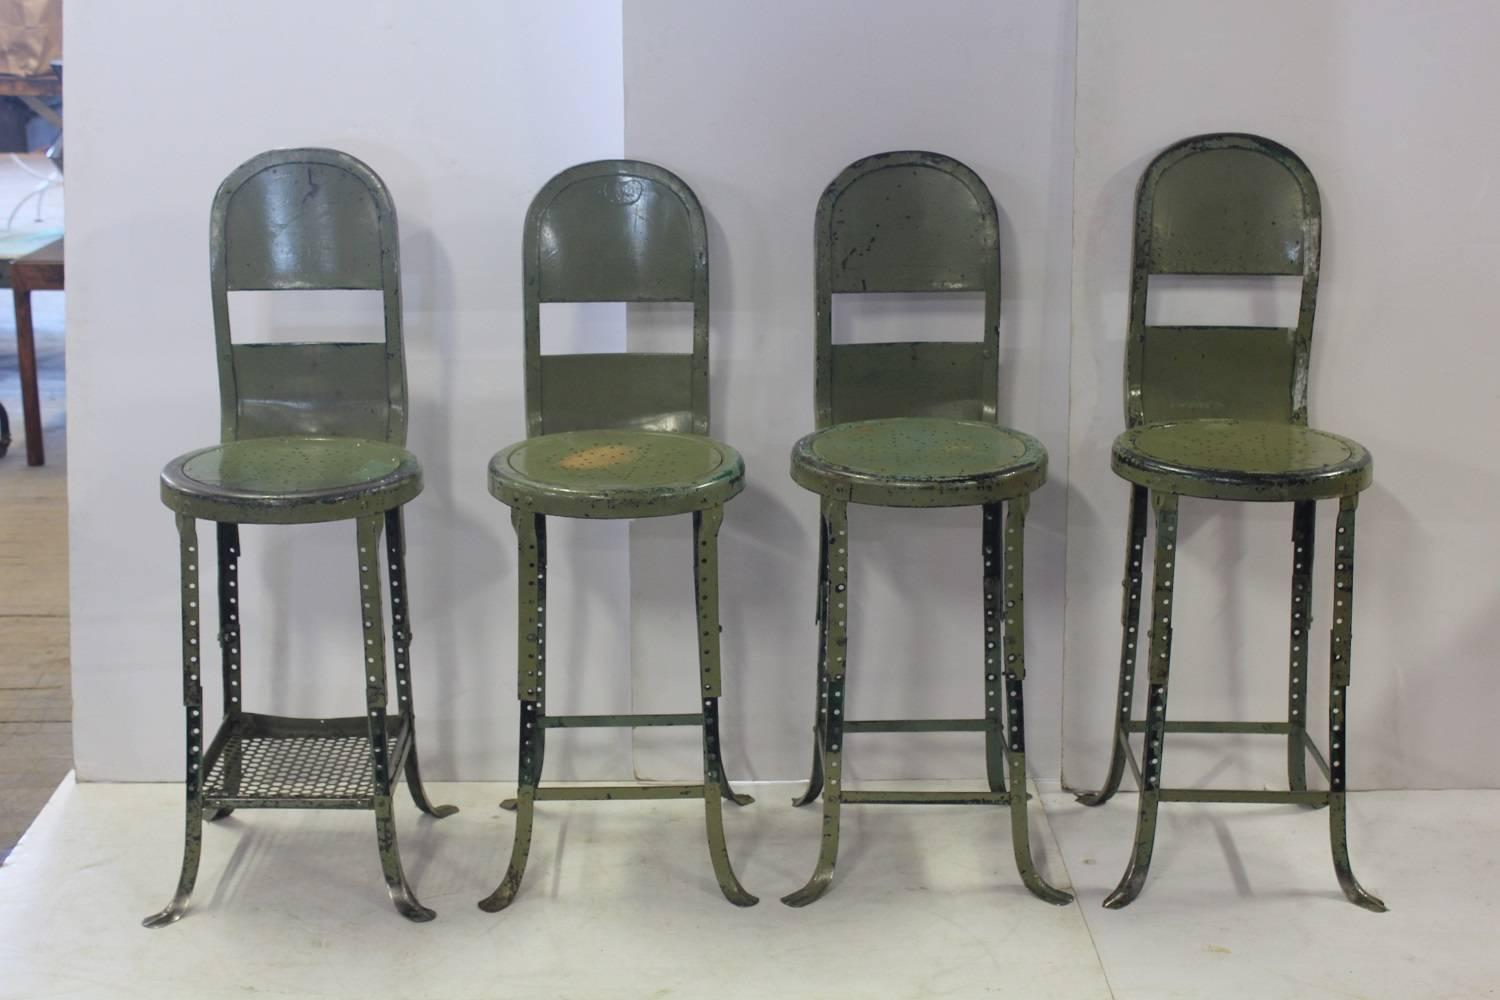 1930s American Industrial adjustable stool. Seat measures: H 16"-28.5". We have 8 available. Listed price is for each stool.